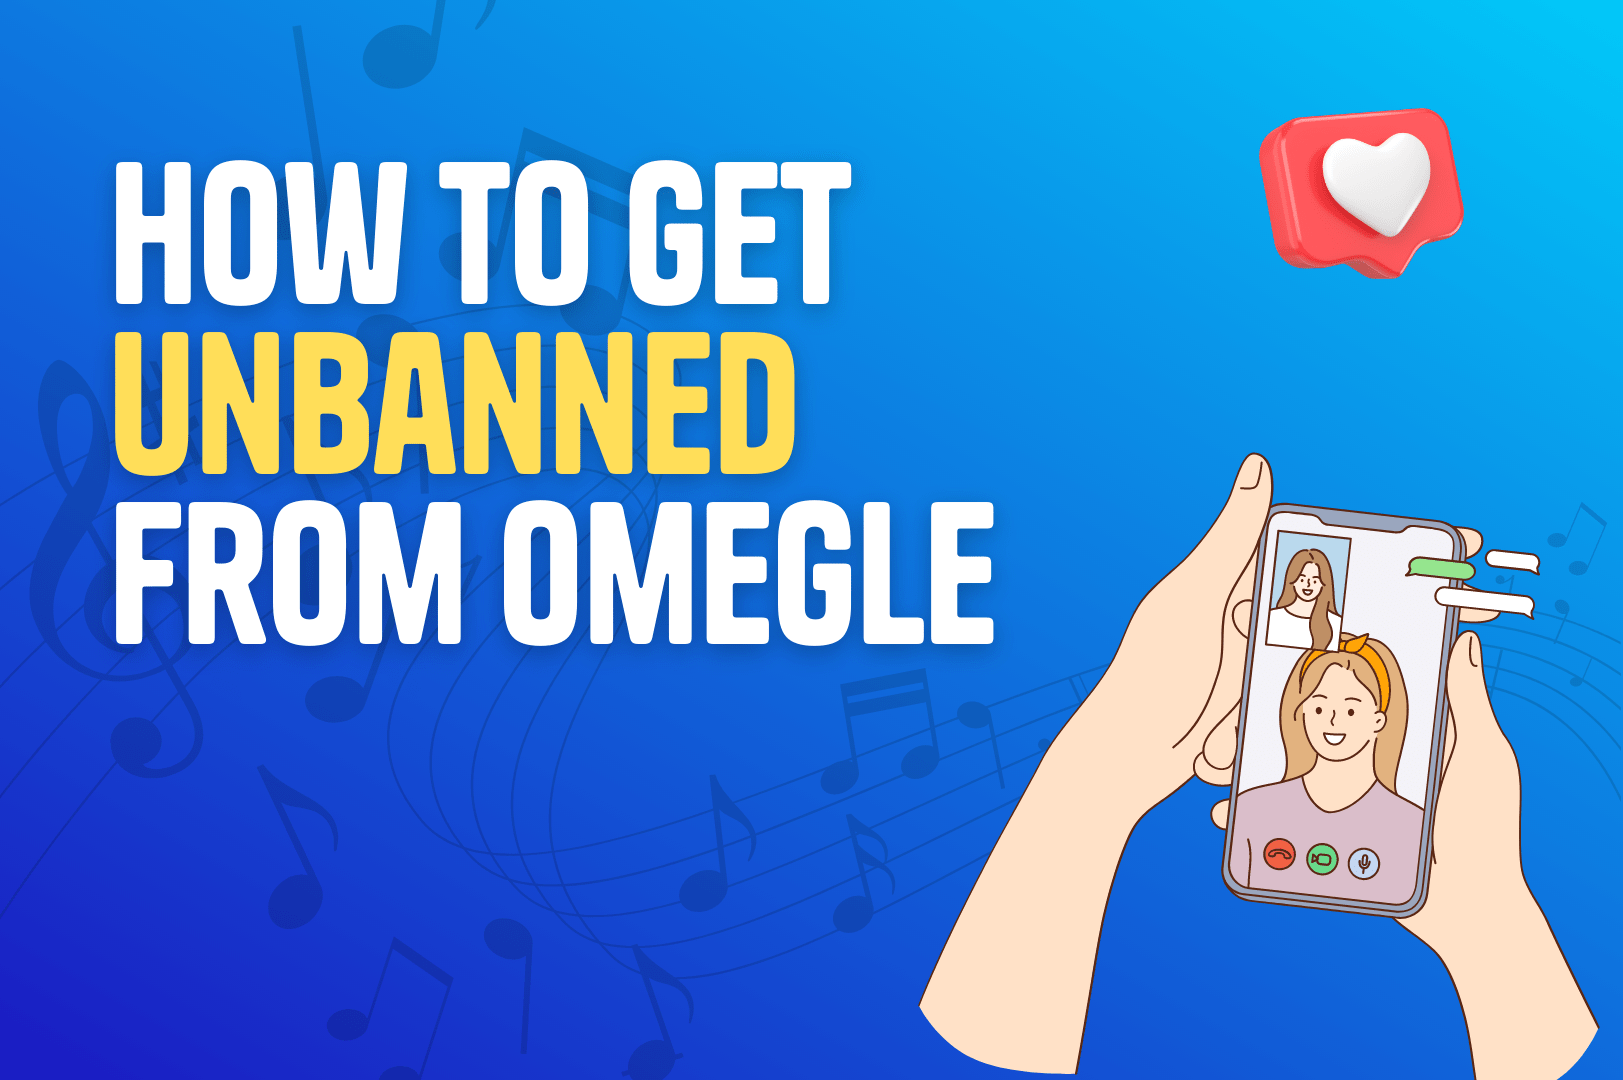 how to get unbanned from omegle video